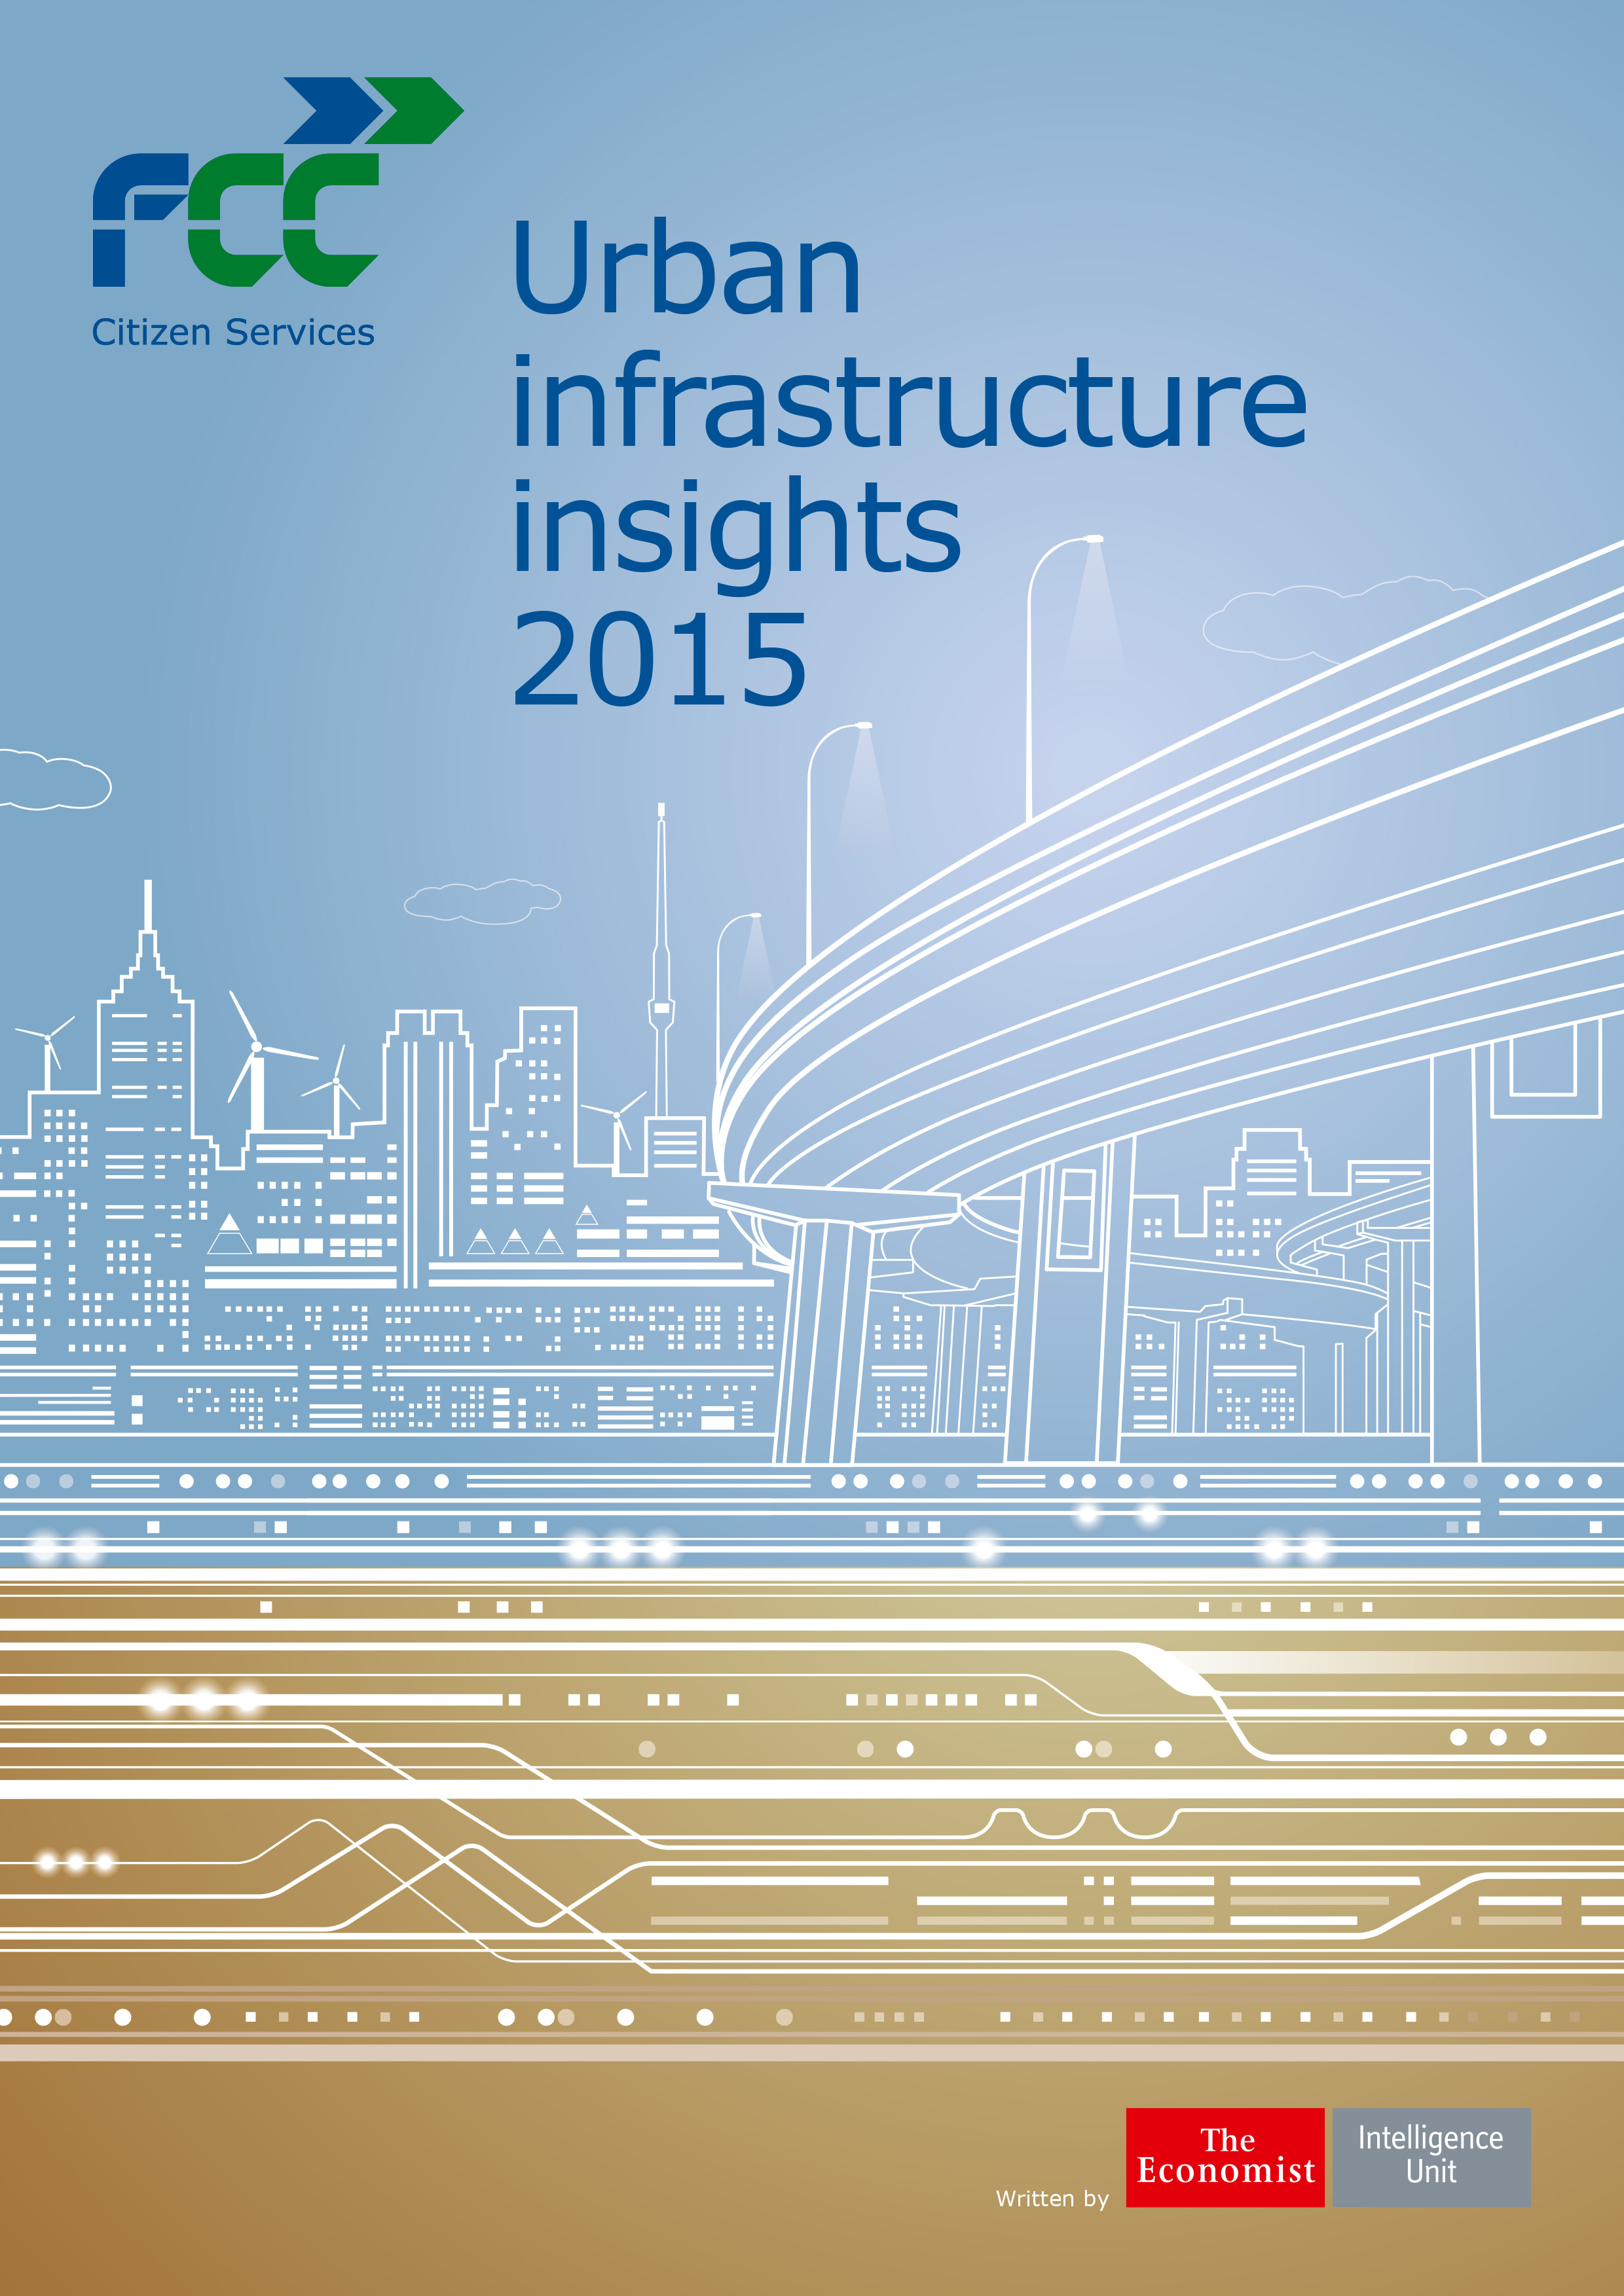 FCC and The Economist analyse trends and challenges of urban infrastructure